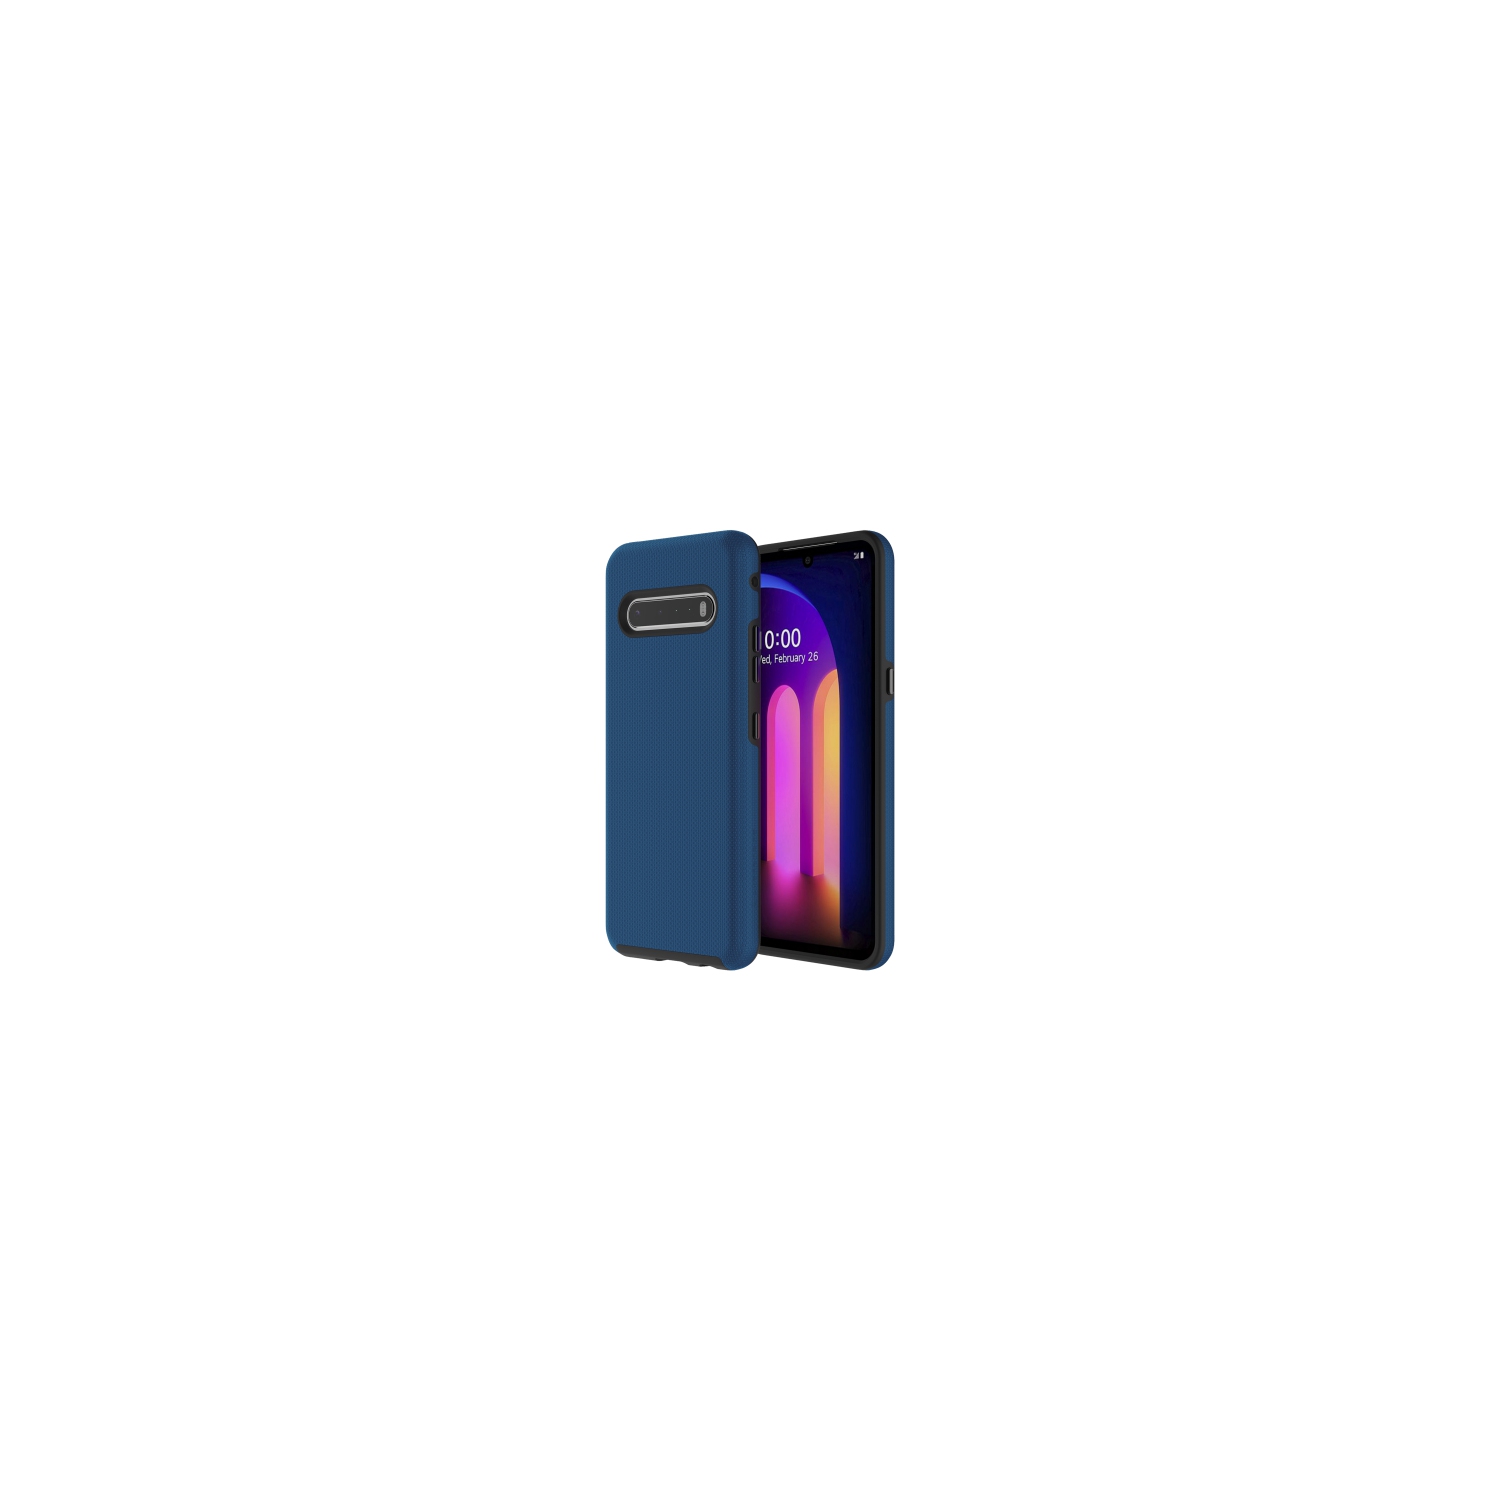 Axessorize PROTech Dual-layered case is an anti-shock case with raised lips and military-grade durability for LG V60 ThinQ | Cobalt Blue